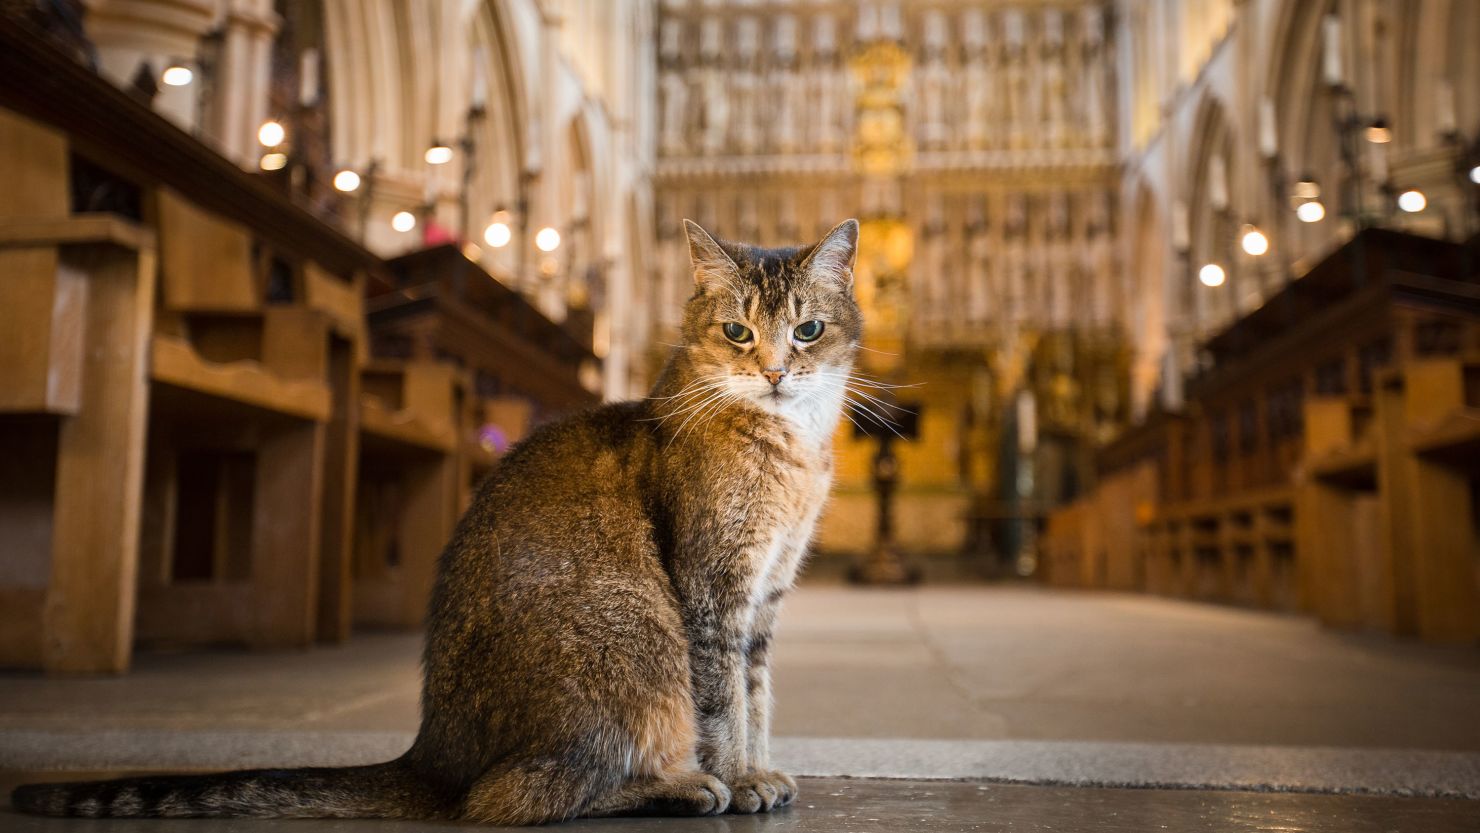 Doorkins Magnificat, a much loved resident of Southwark Cathedral, has been honored in a special memorial service after passing away last month.